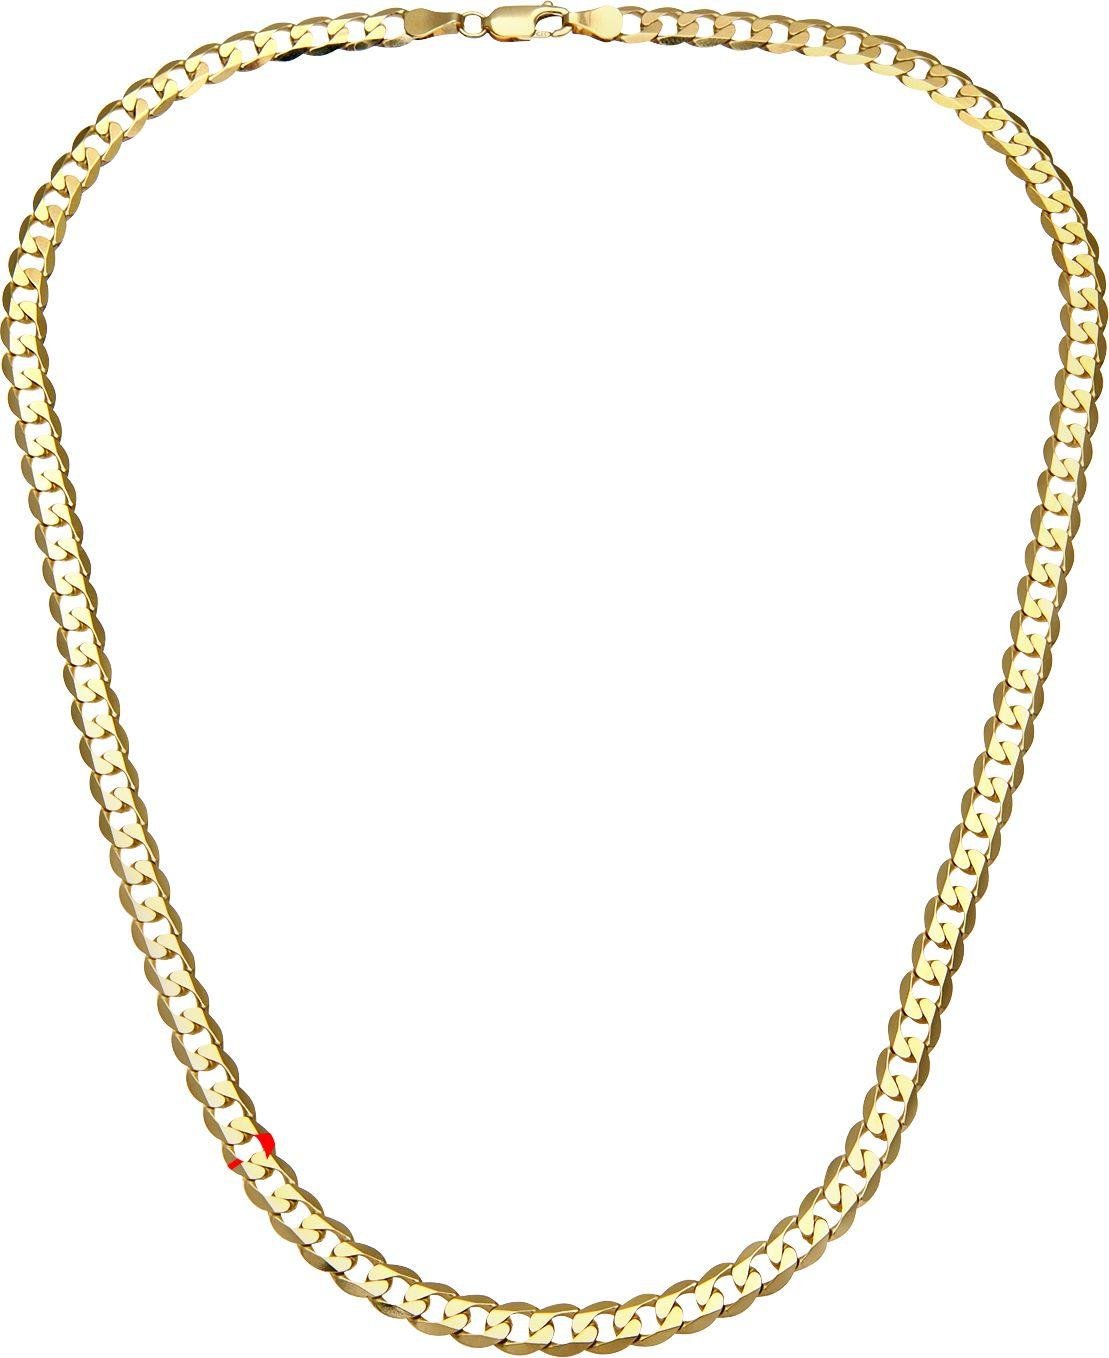 9ct Gold Curb Chain Review